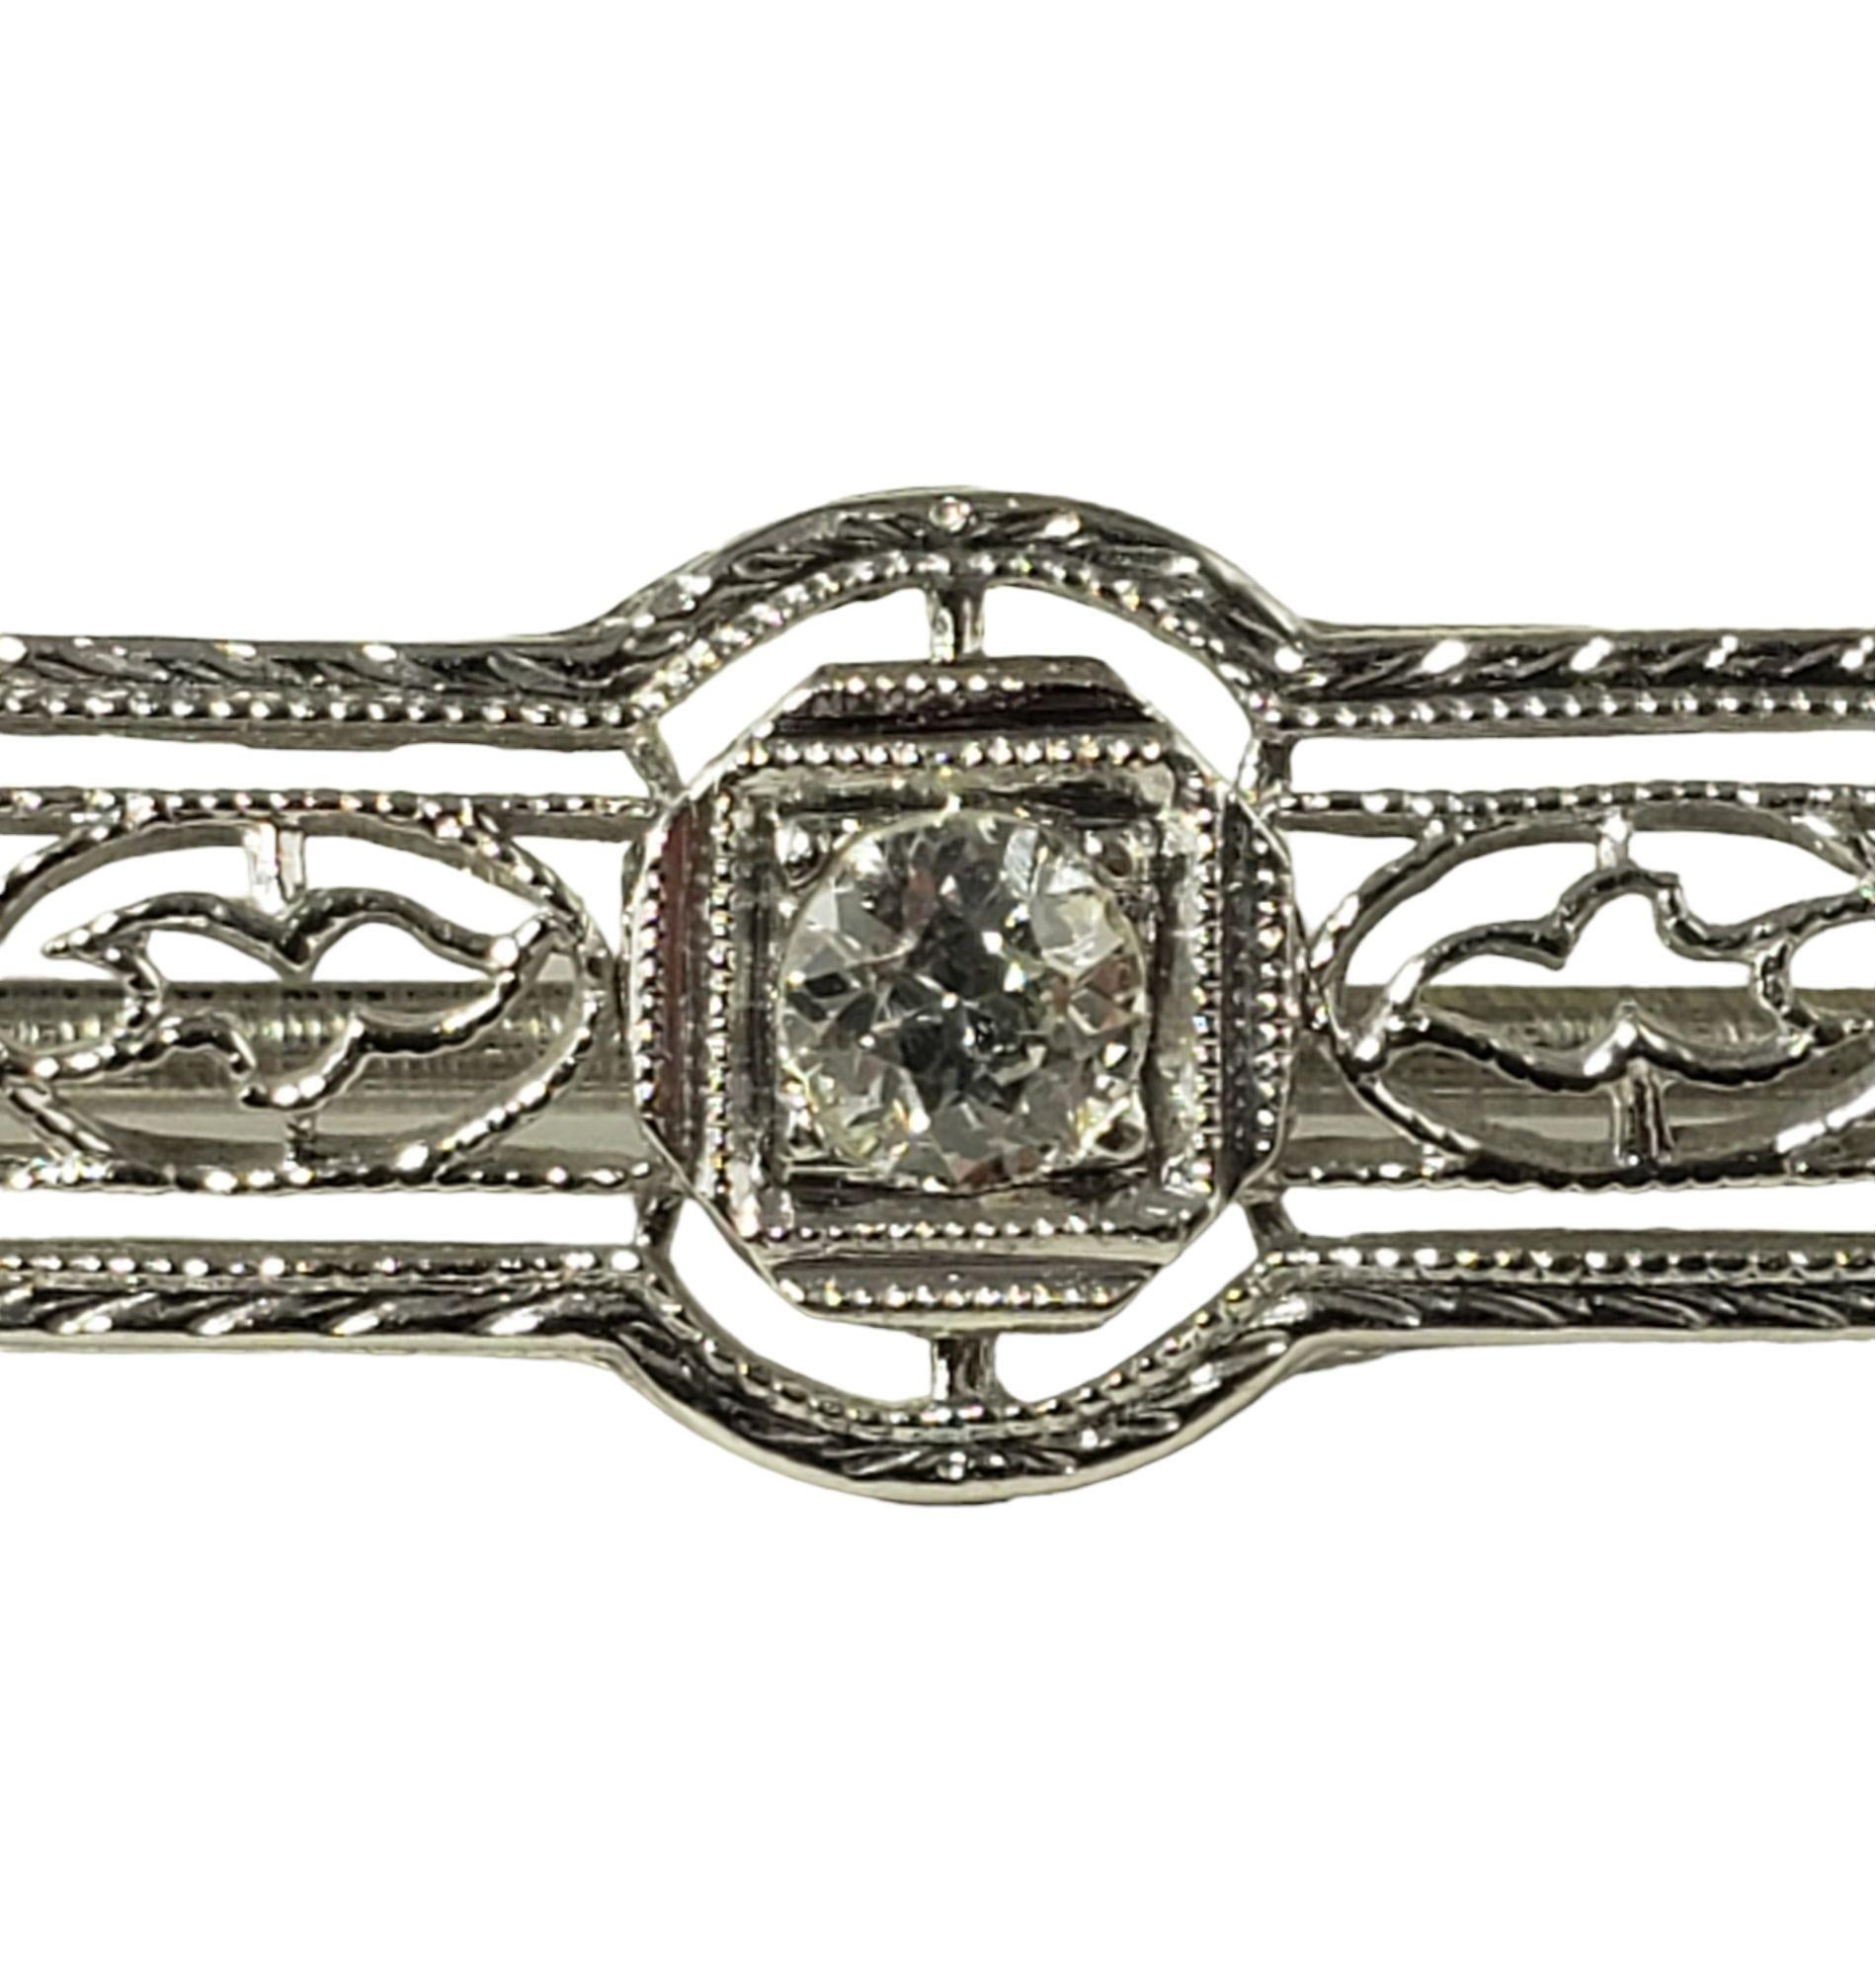 14 Karat White Gold Filigree and Diamond Bar Pin #14711 In Good Condition For Sale In Washington Depot, CT